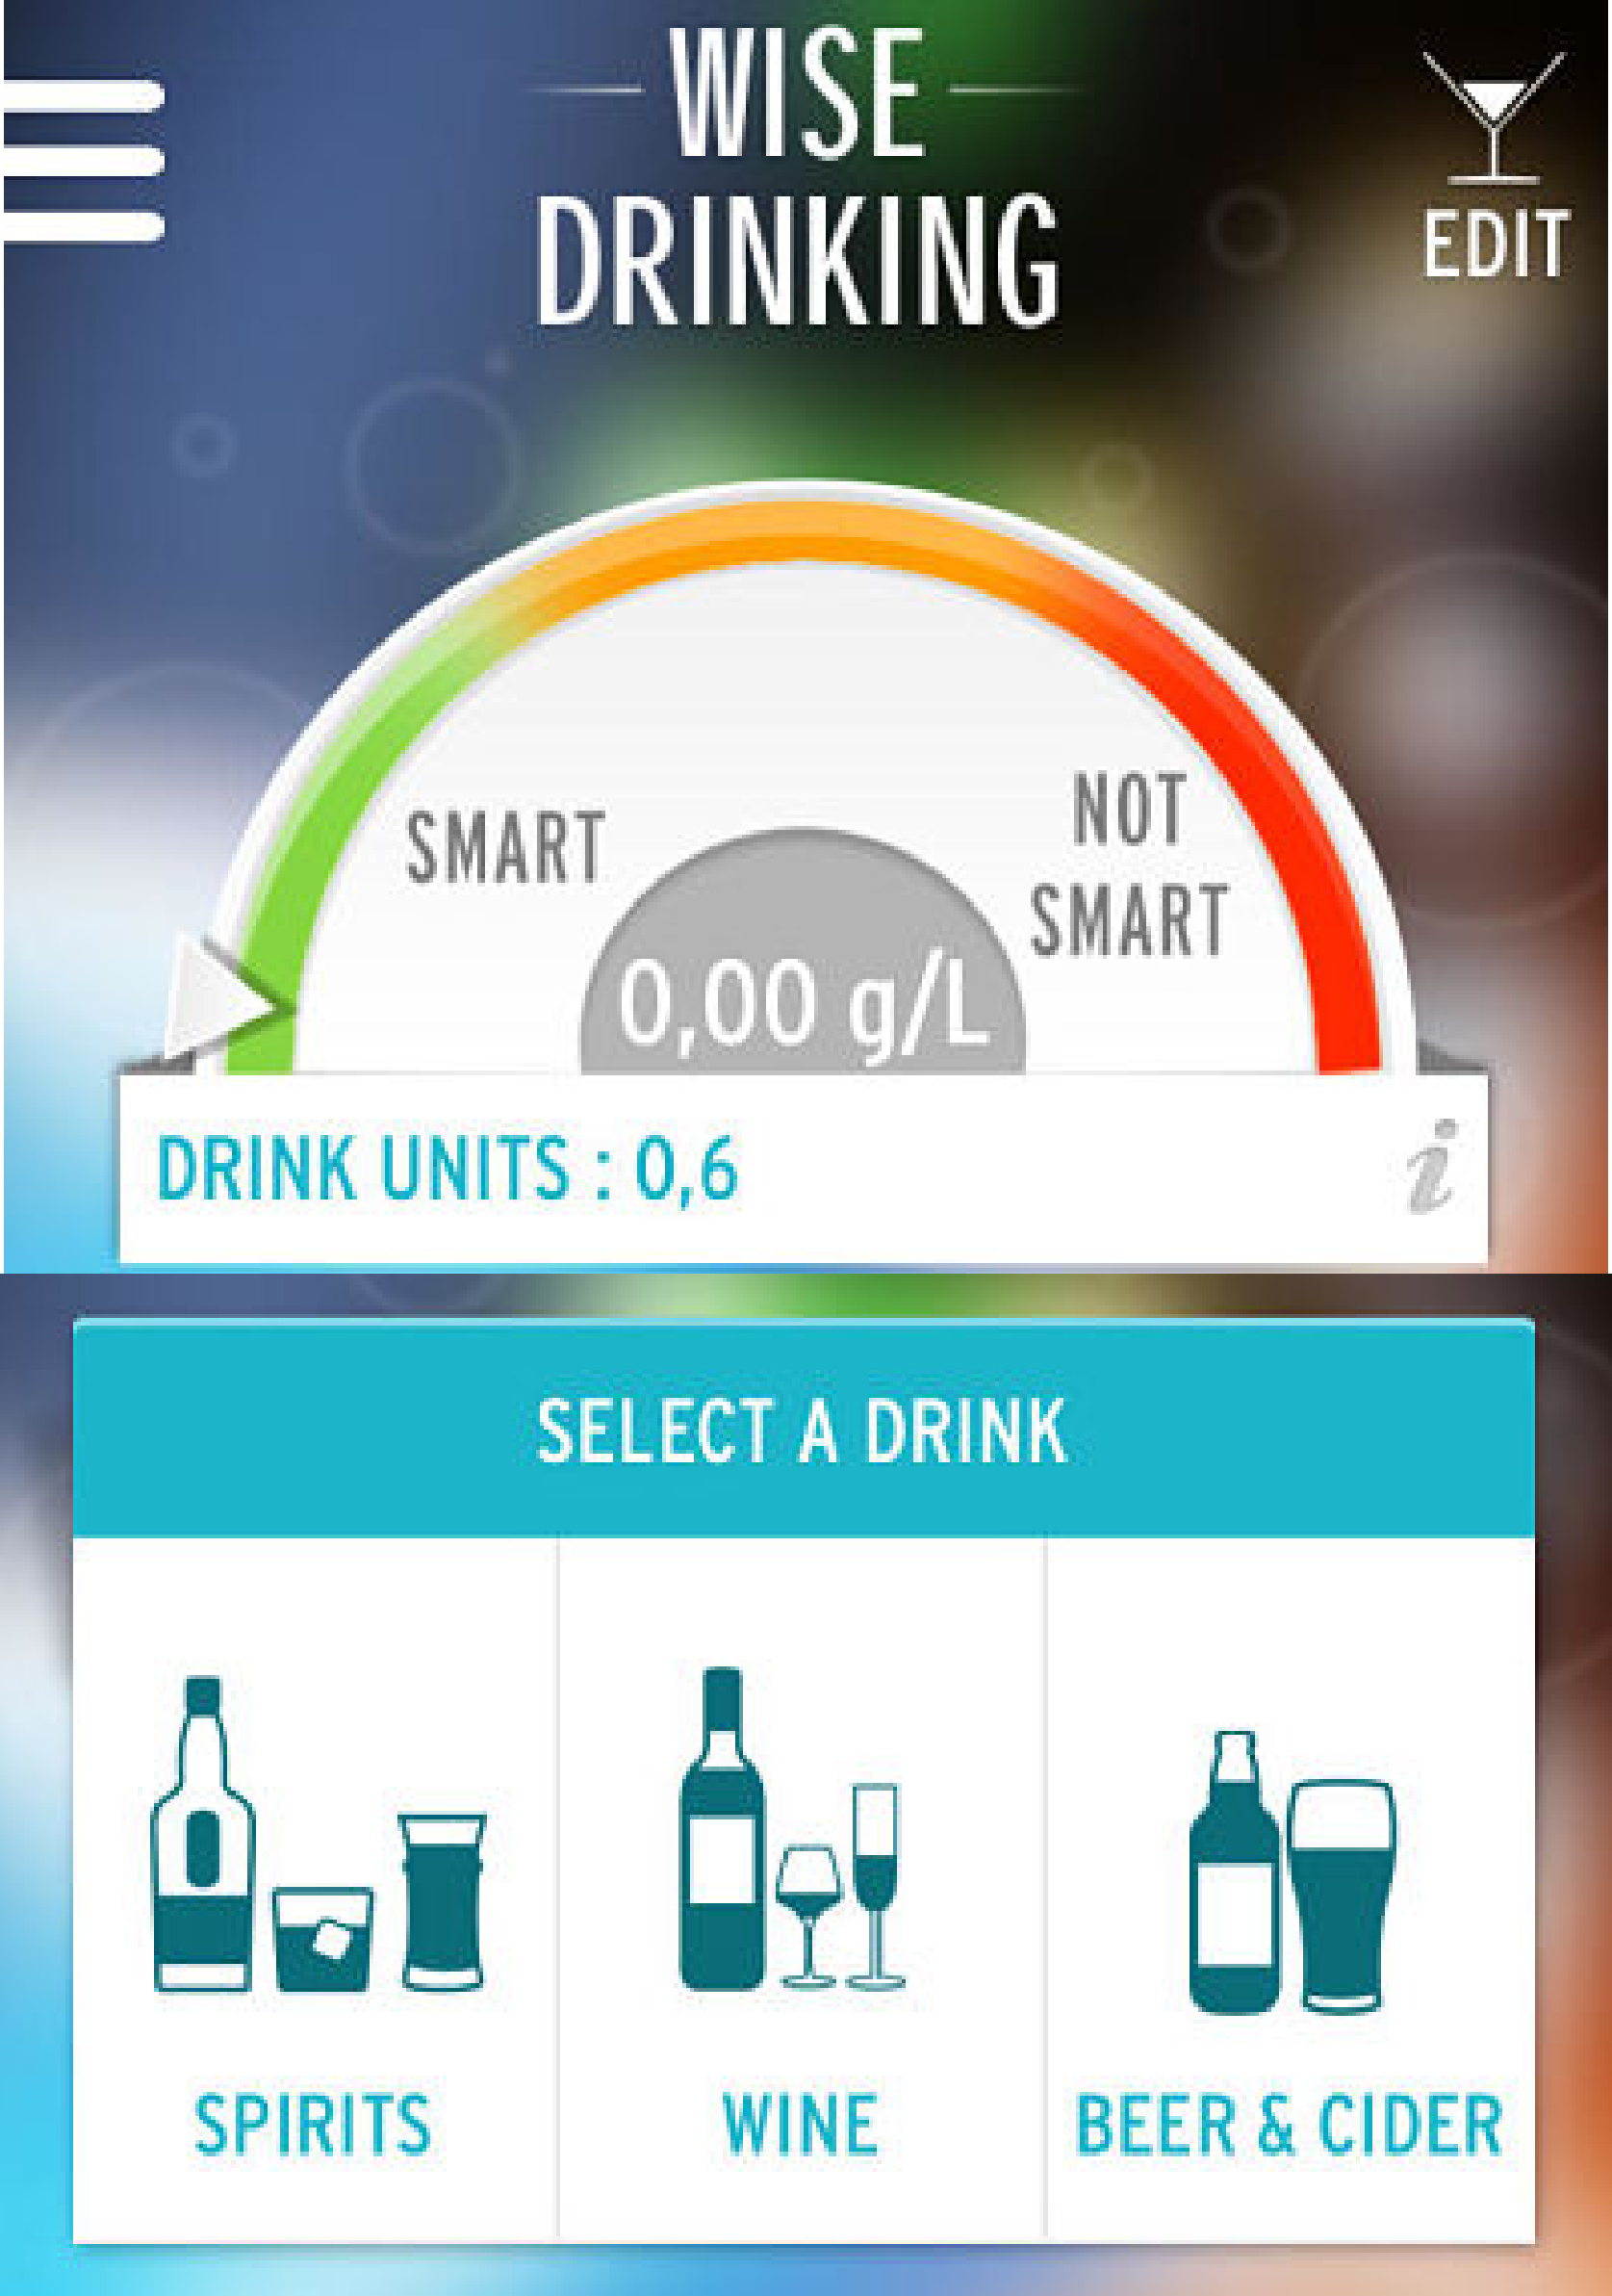 Pernod Ricard's New App: "Drinking is Smart!" - Alcohol ...